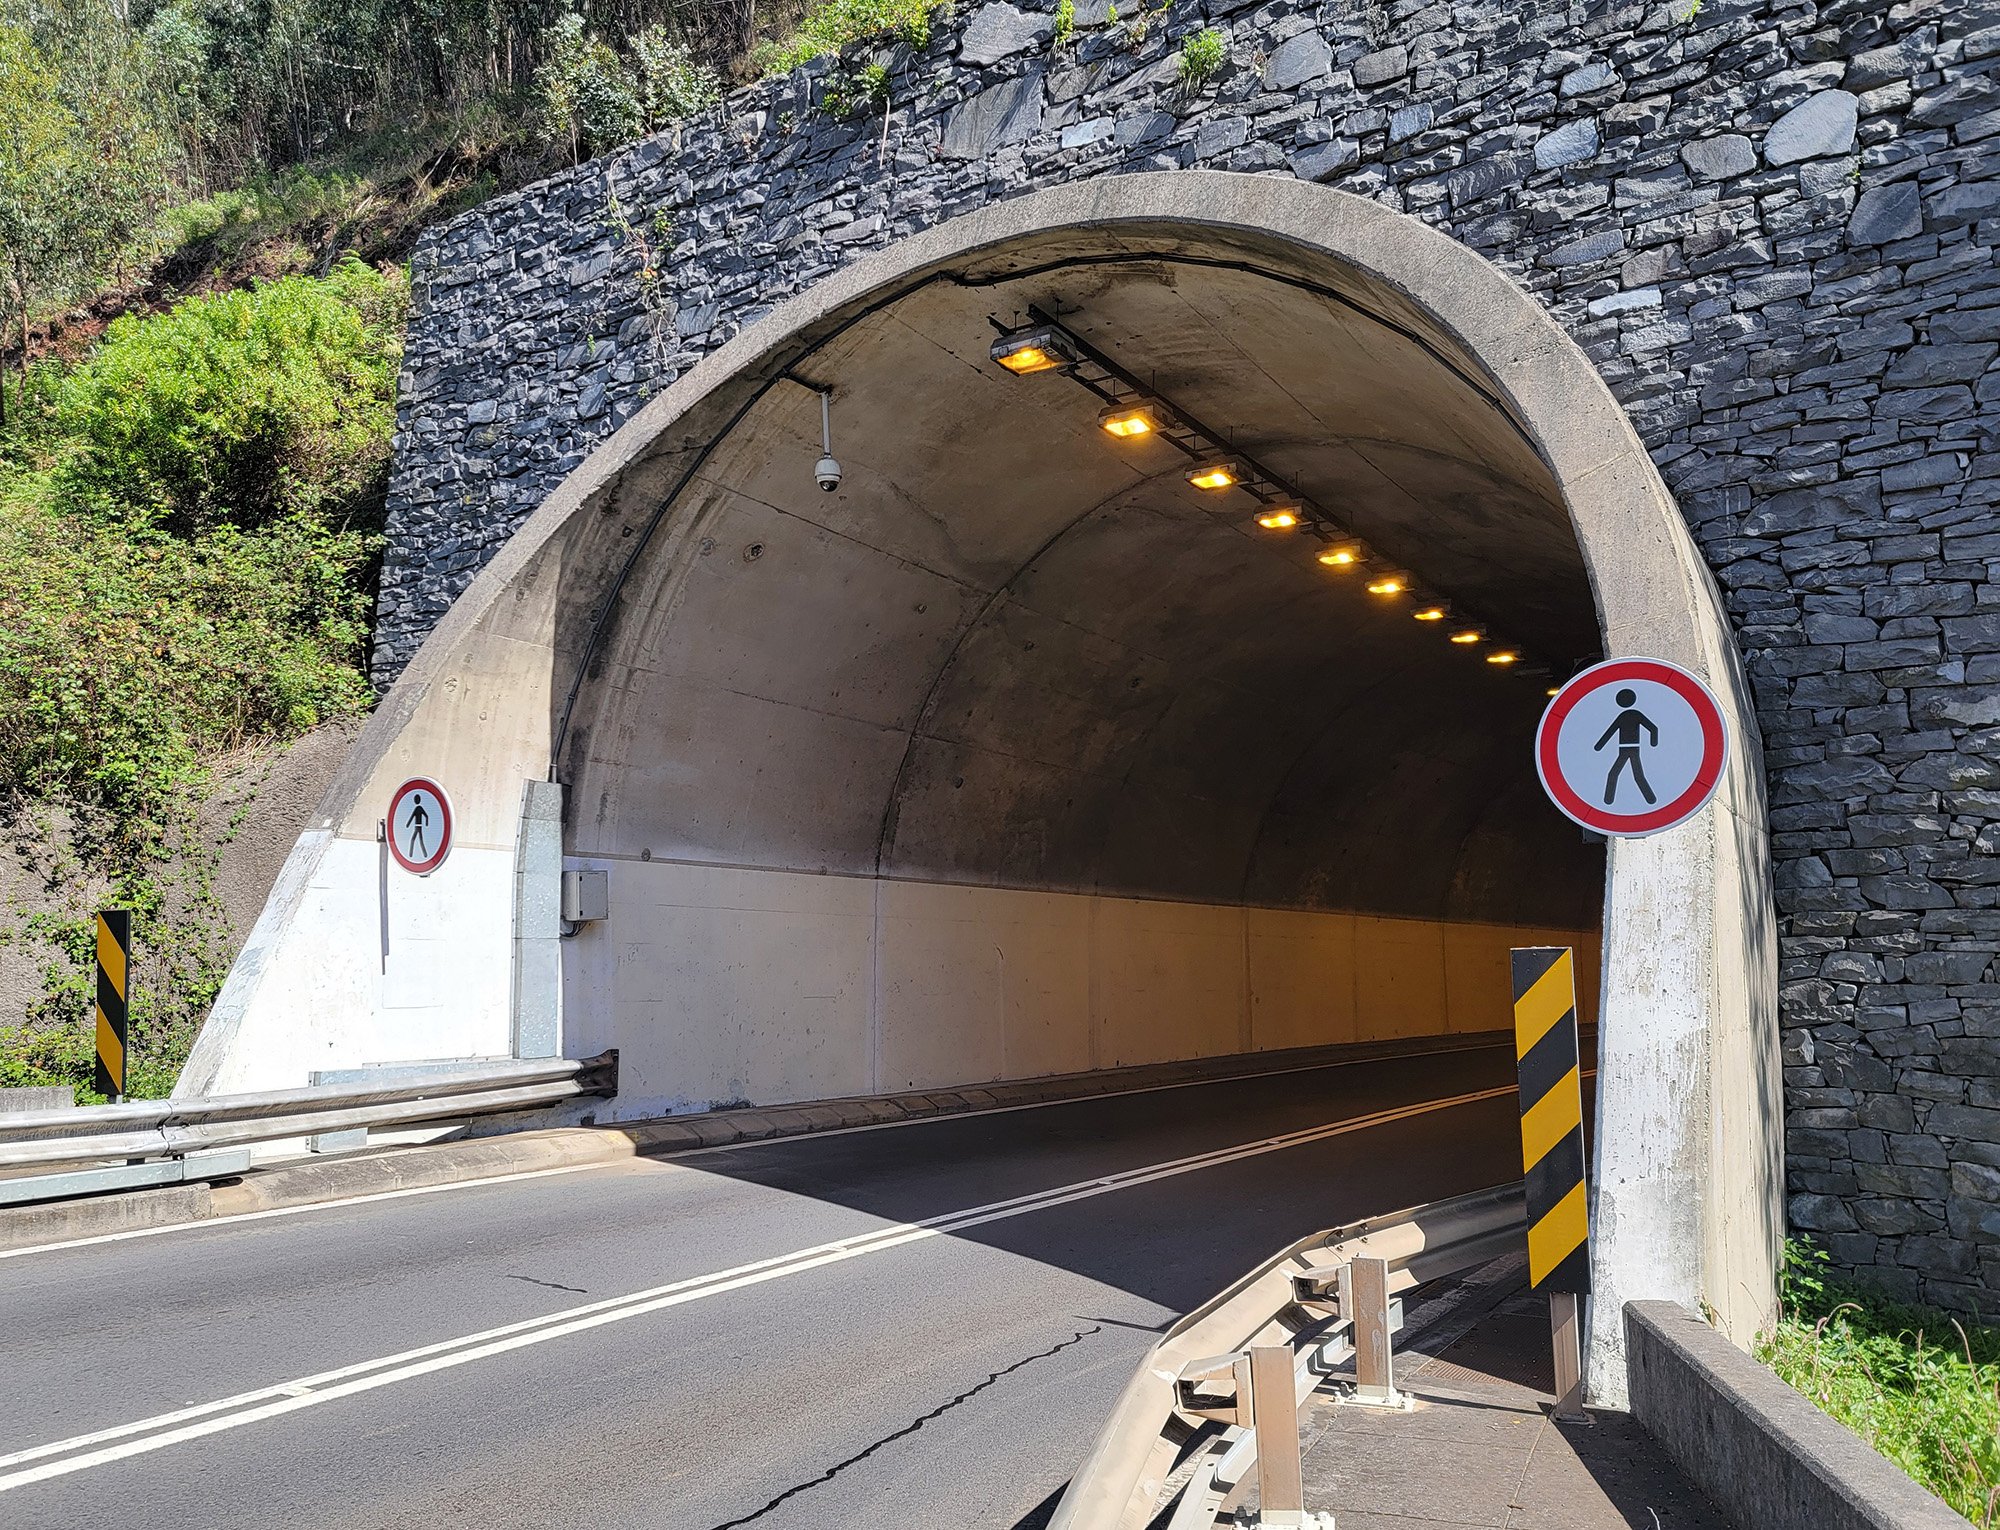 Unfortunately the only way back to Funchal from there goes through about 20-25km of these tunnels...